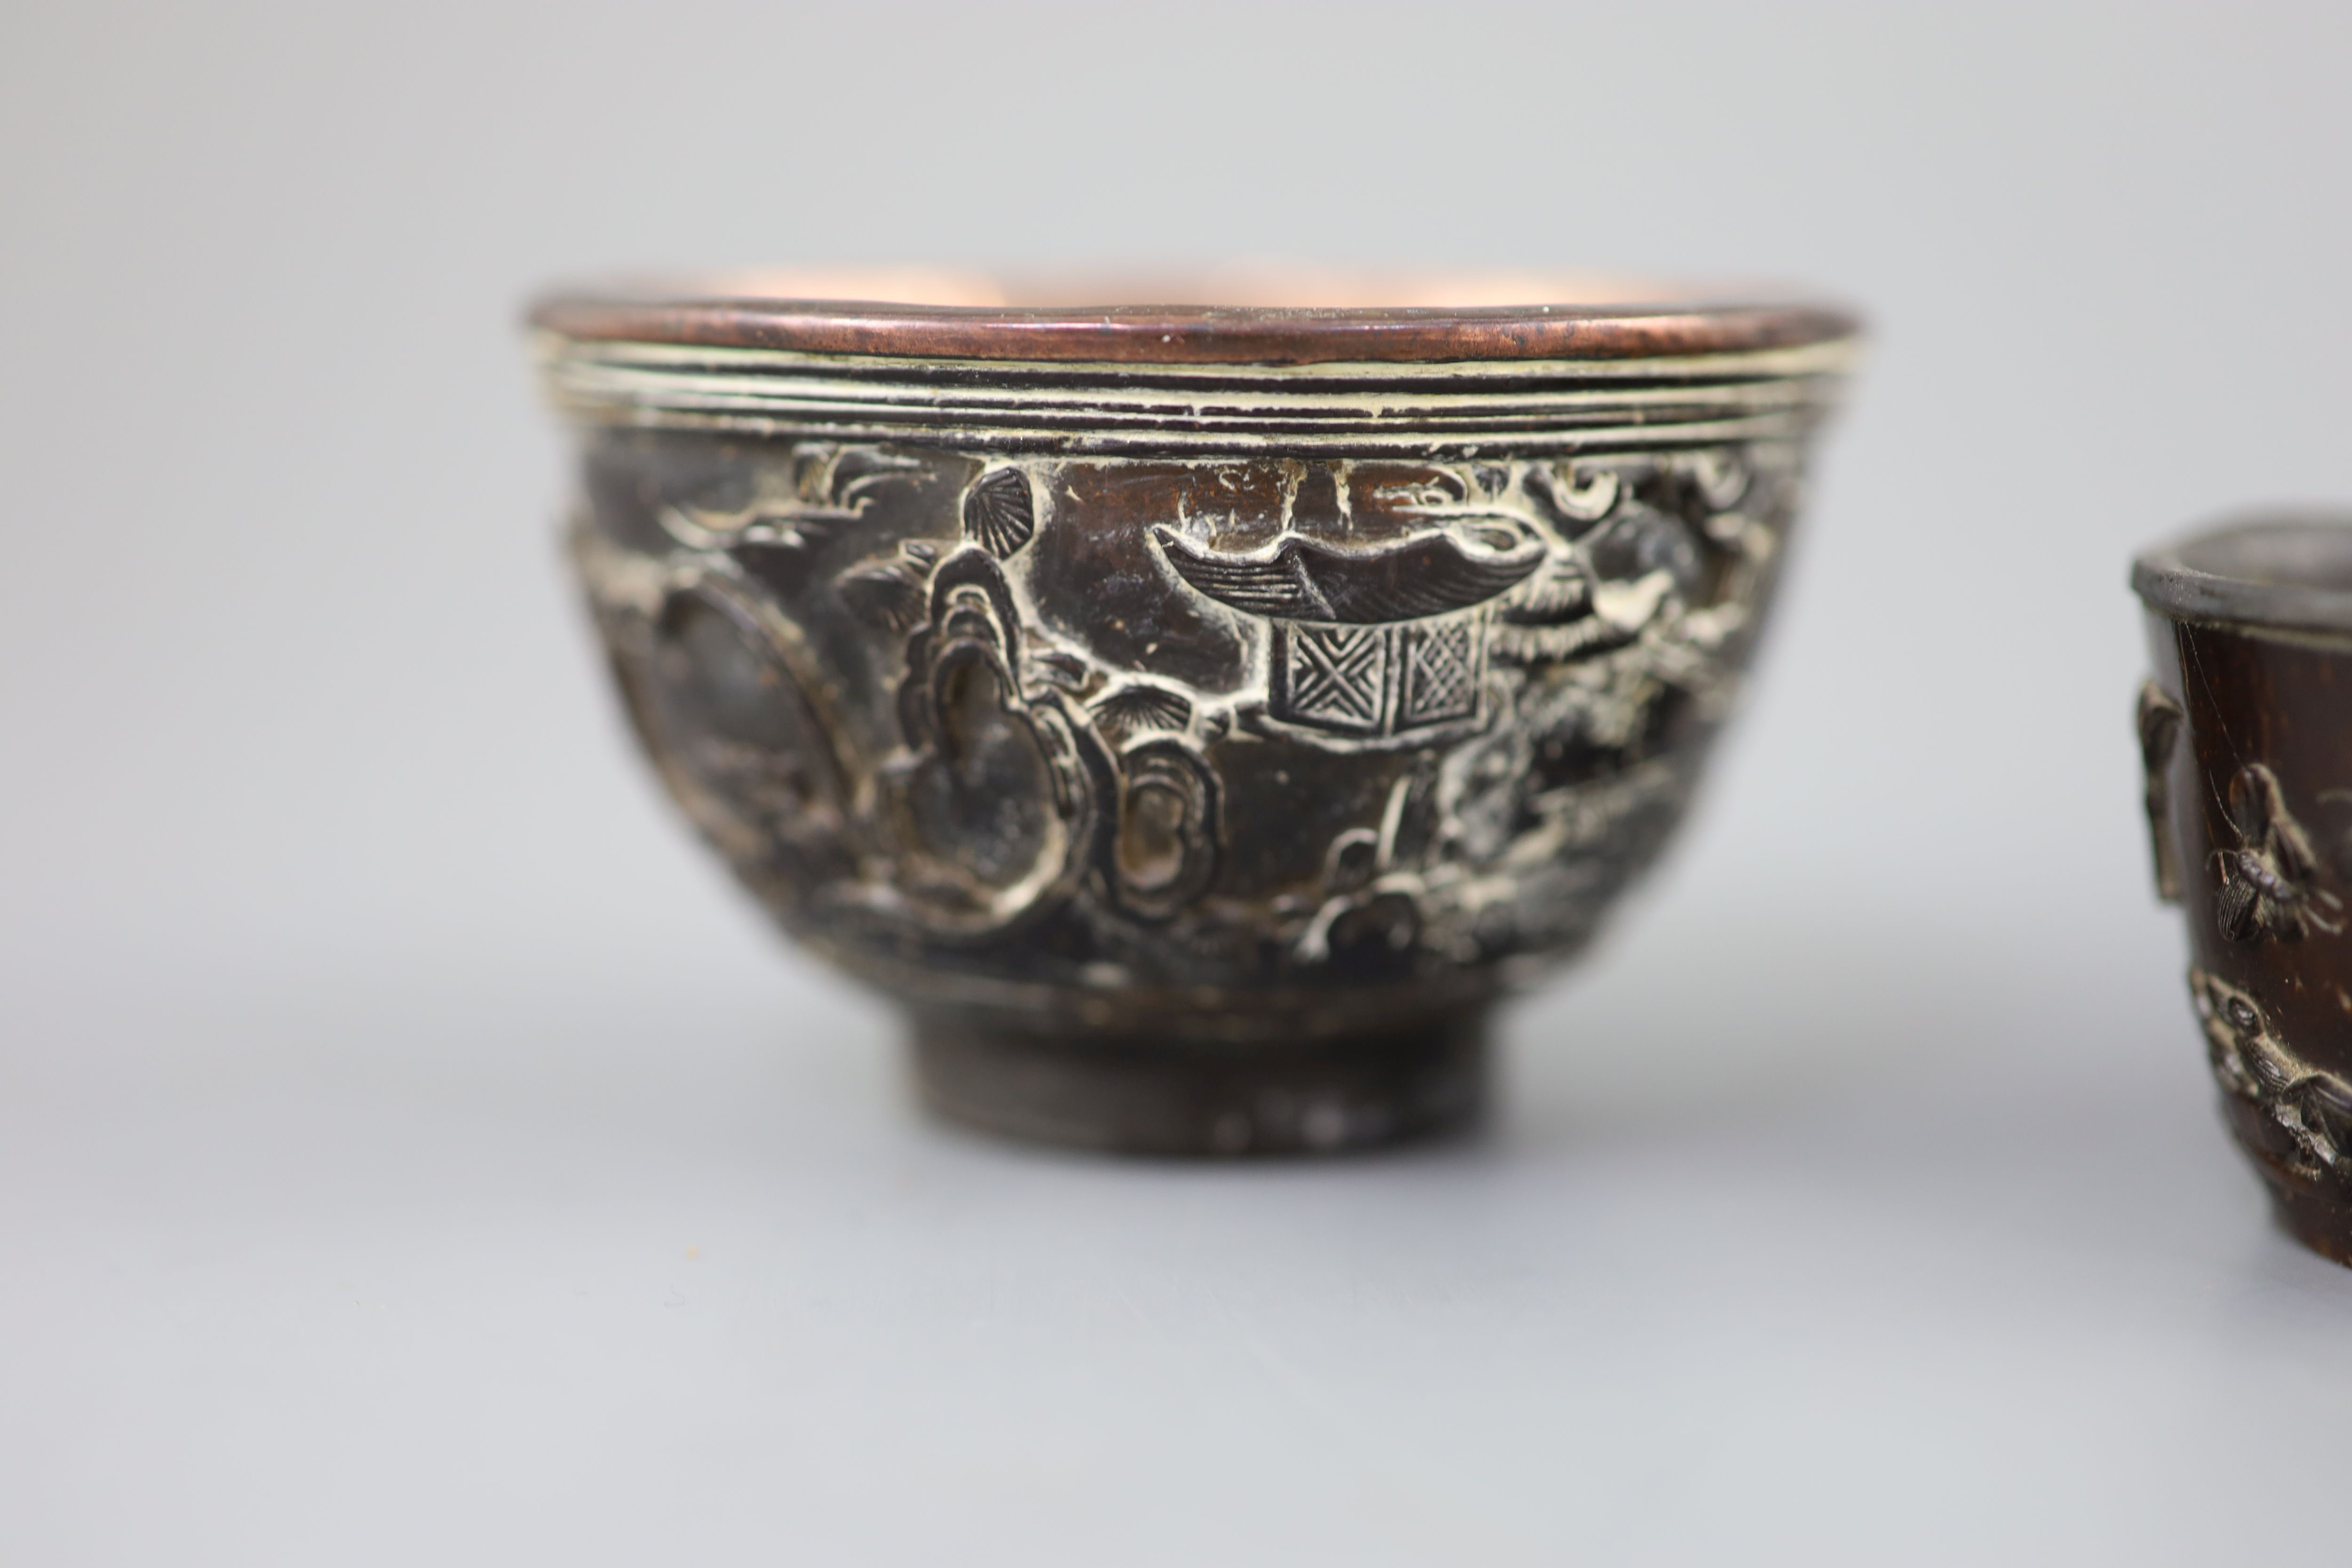 A pair of Chinese coconut landscape cups and a similar peach-shaped cup, 18th/19th century,